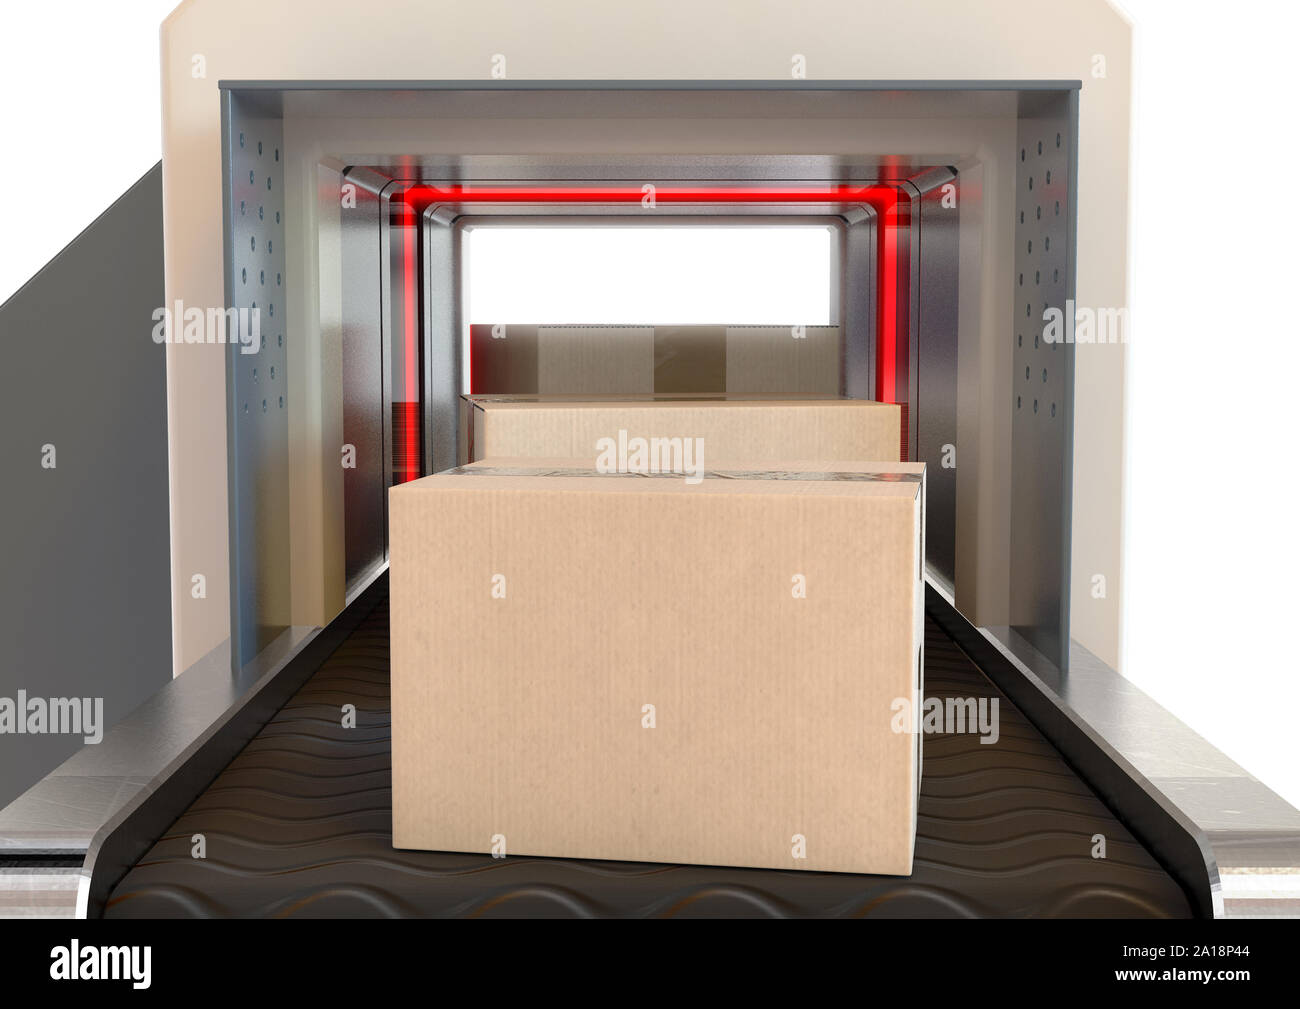 A cardboard box being examined by red lights while going through a baggage scanner on an isolated background - 3D render Stock Photo